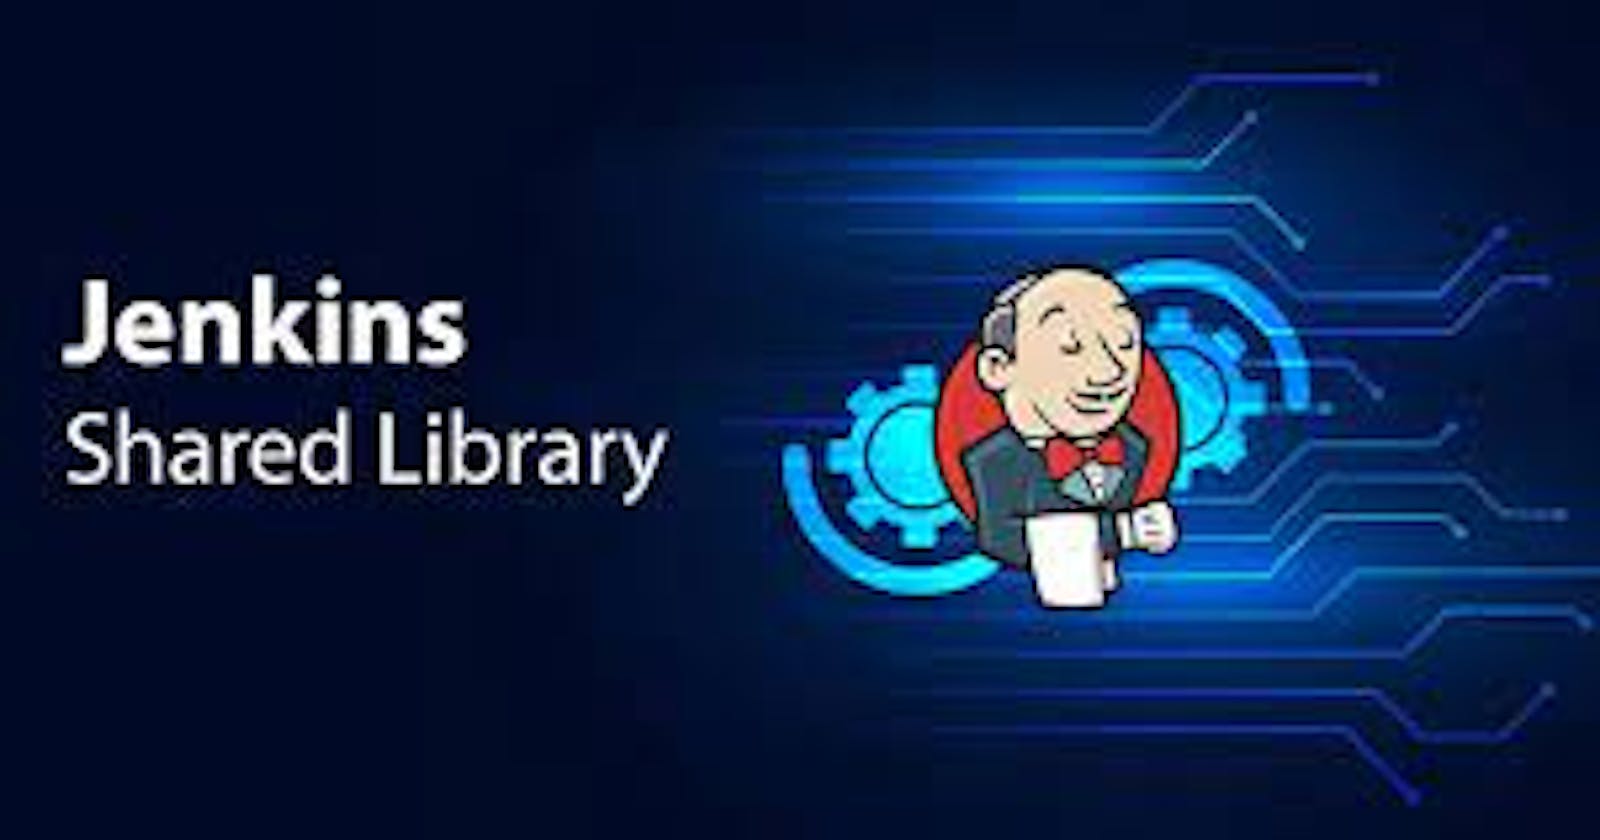 Jenkins Shared library :